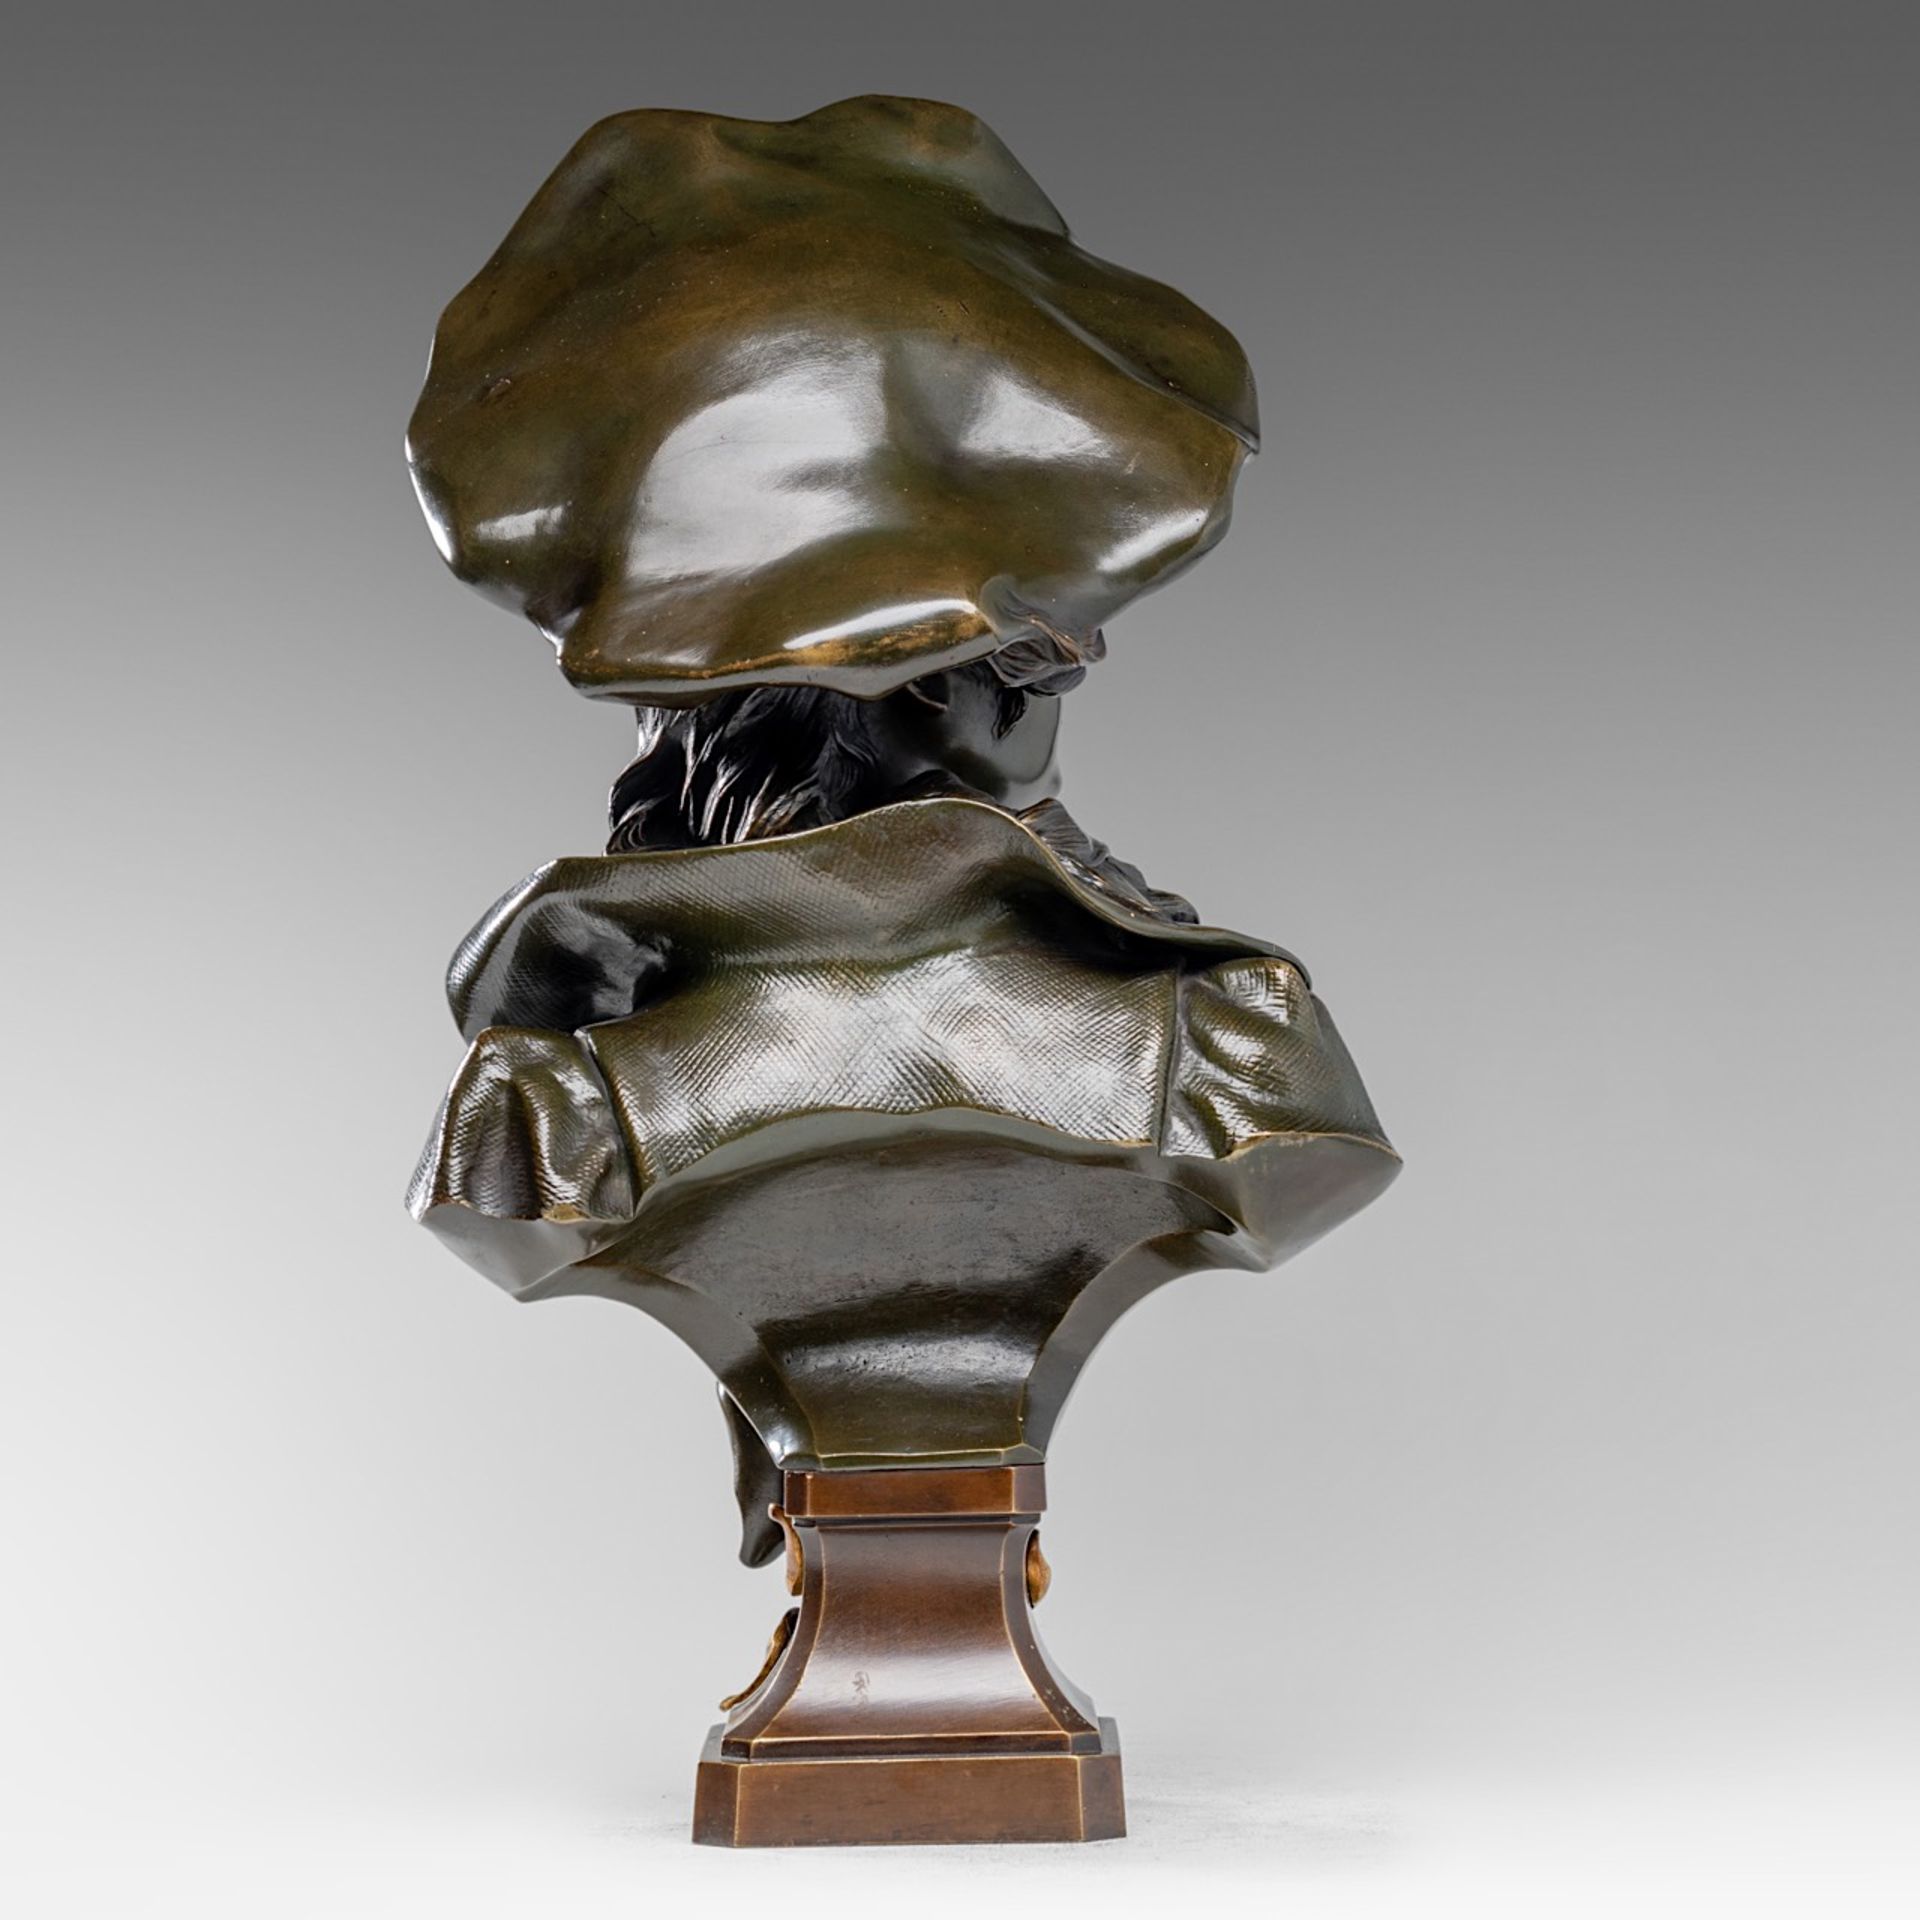 Anton Nelson (1849-1910), 'Fantasia', green patinated bronze bust, H 48 cm - Image 5 of 11